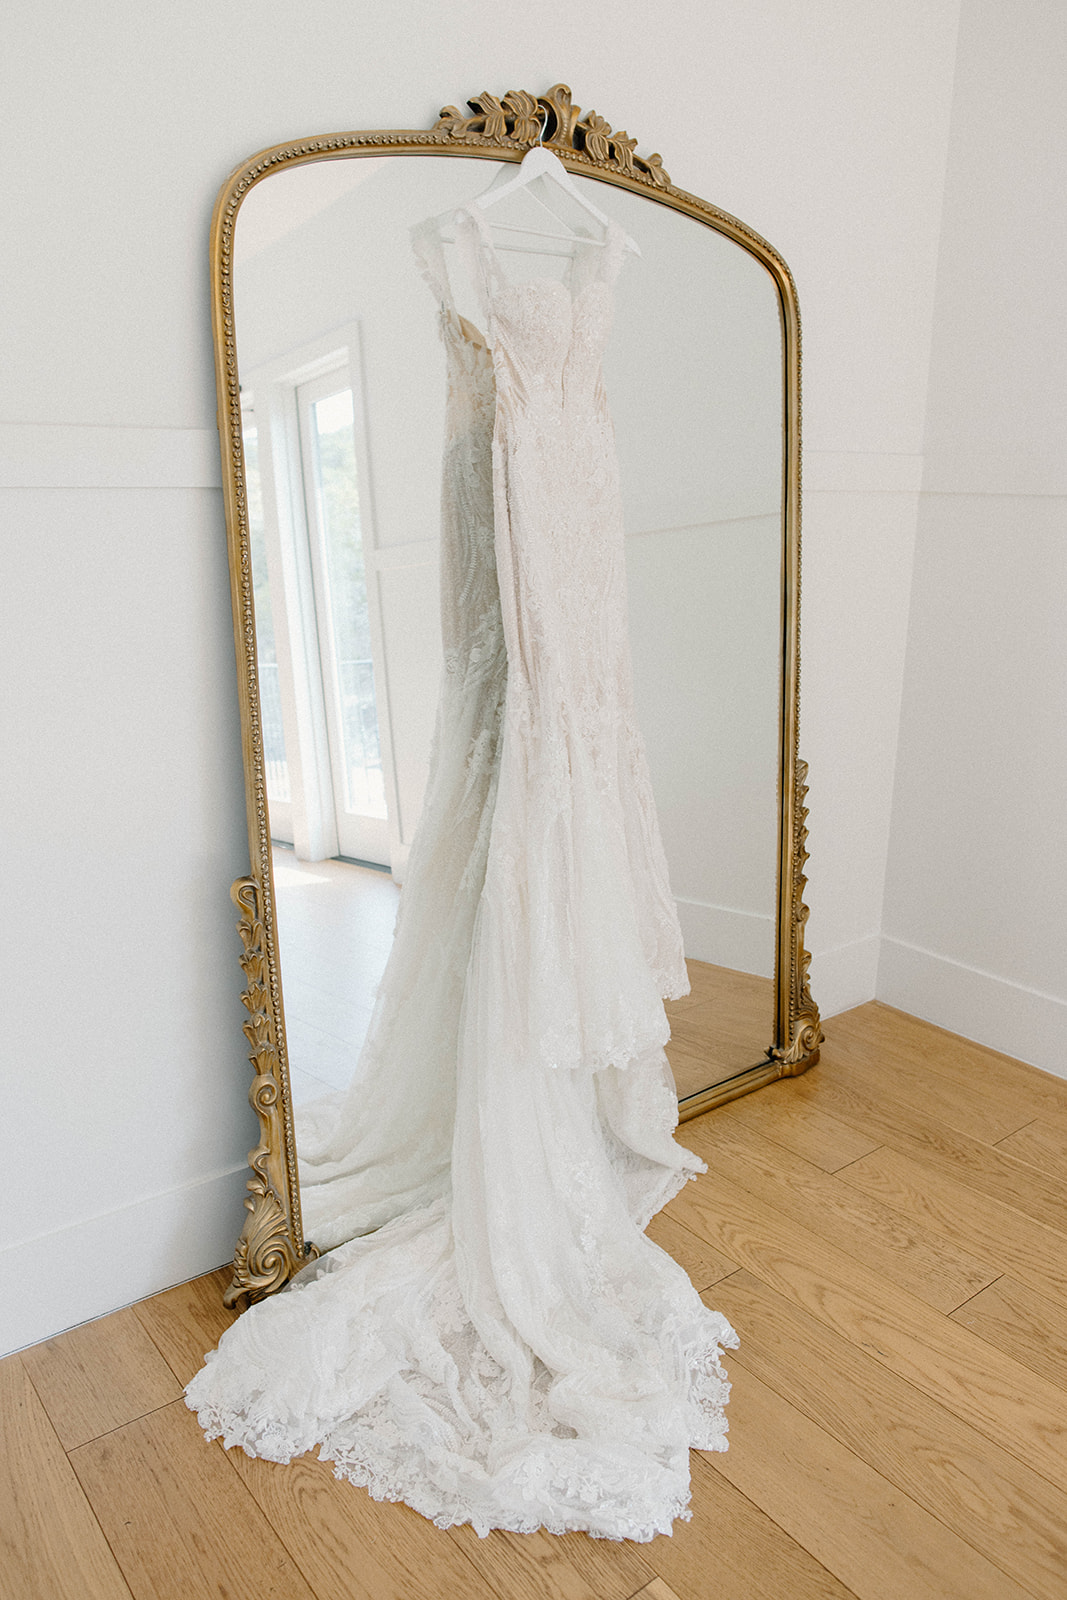 Lace wedding gown hanging on gold mirror